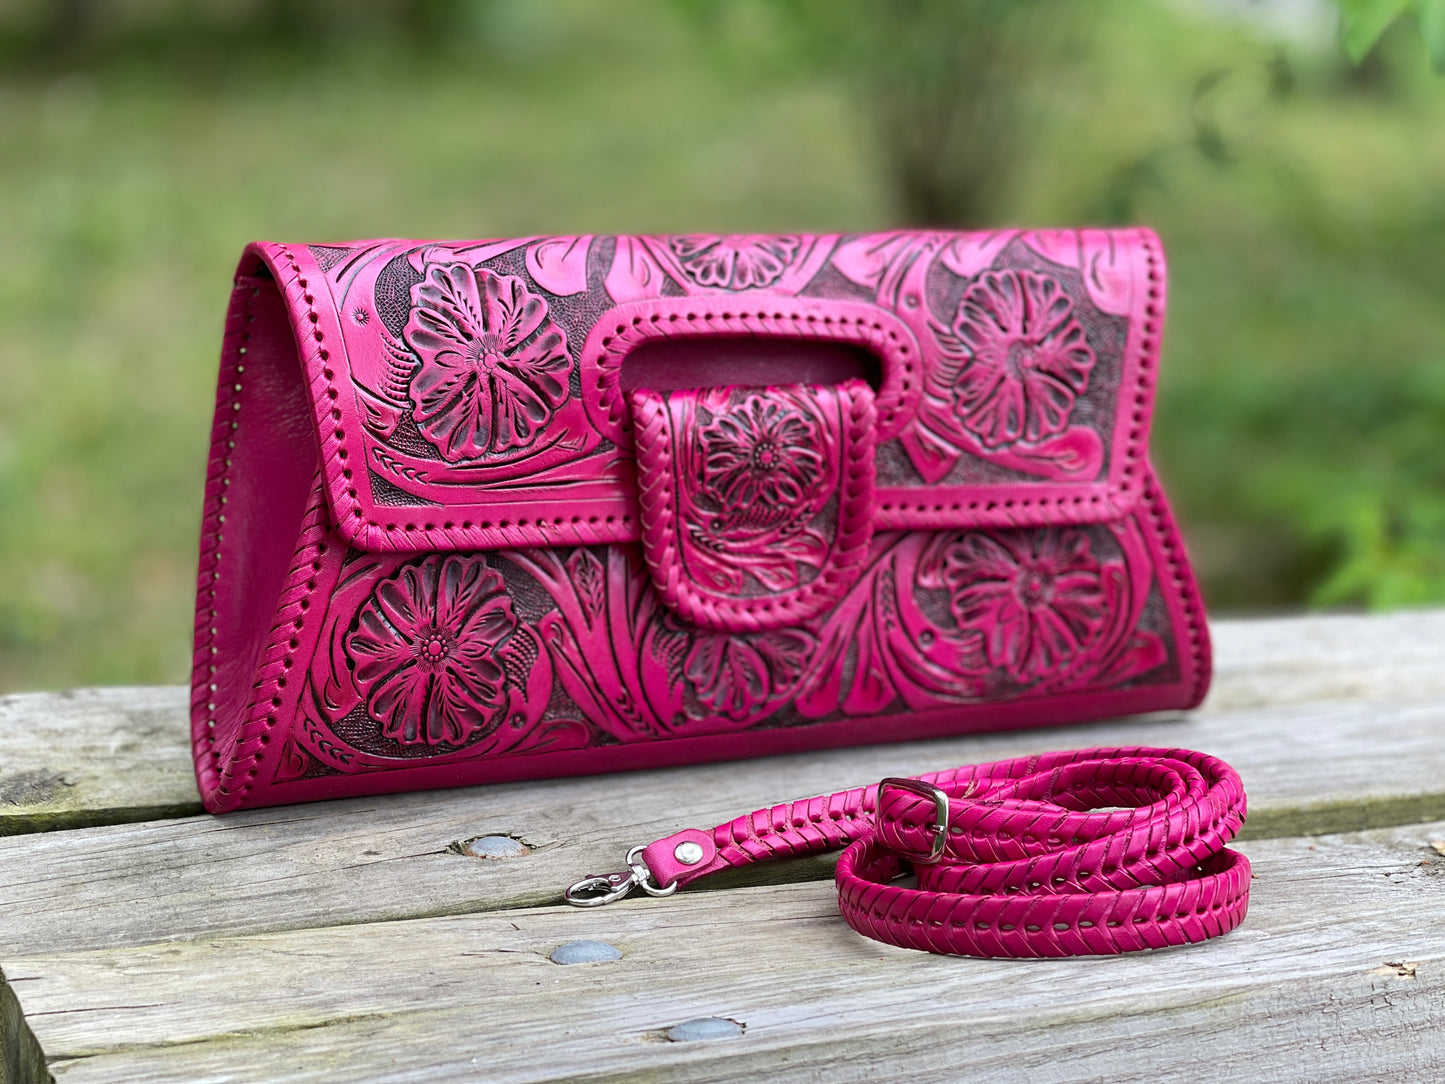 Hand-Tooled Leather Large Crossbody Clutch "LENGUETA" by ALLE - ALLE Handbags